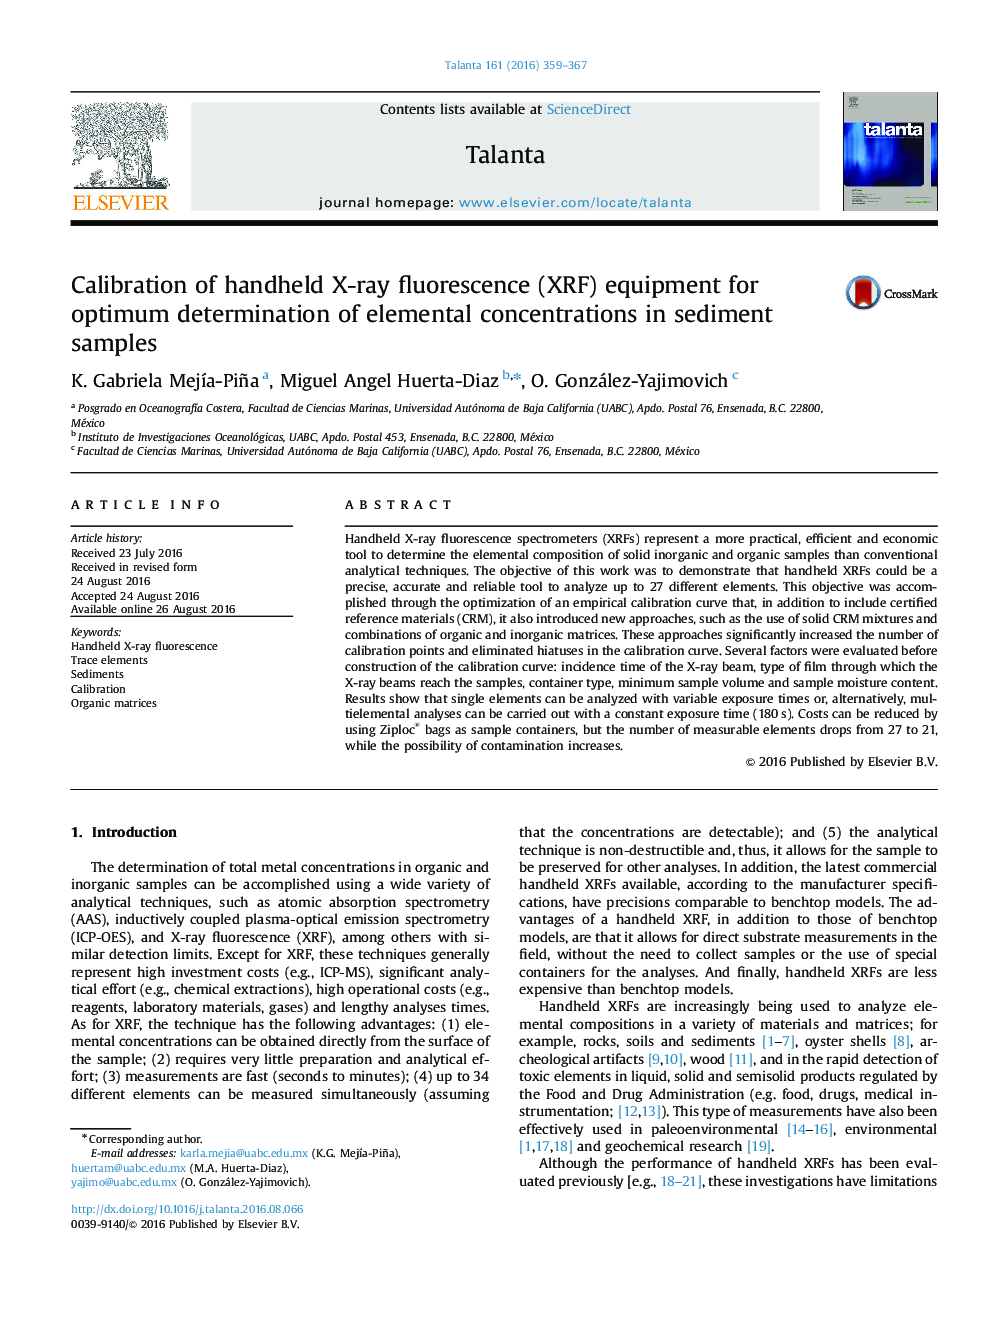 Calibration of handheld X-ray fluorescence (XRF) equipment for optimum determination of elemental concentrations in sediment samples